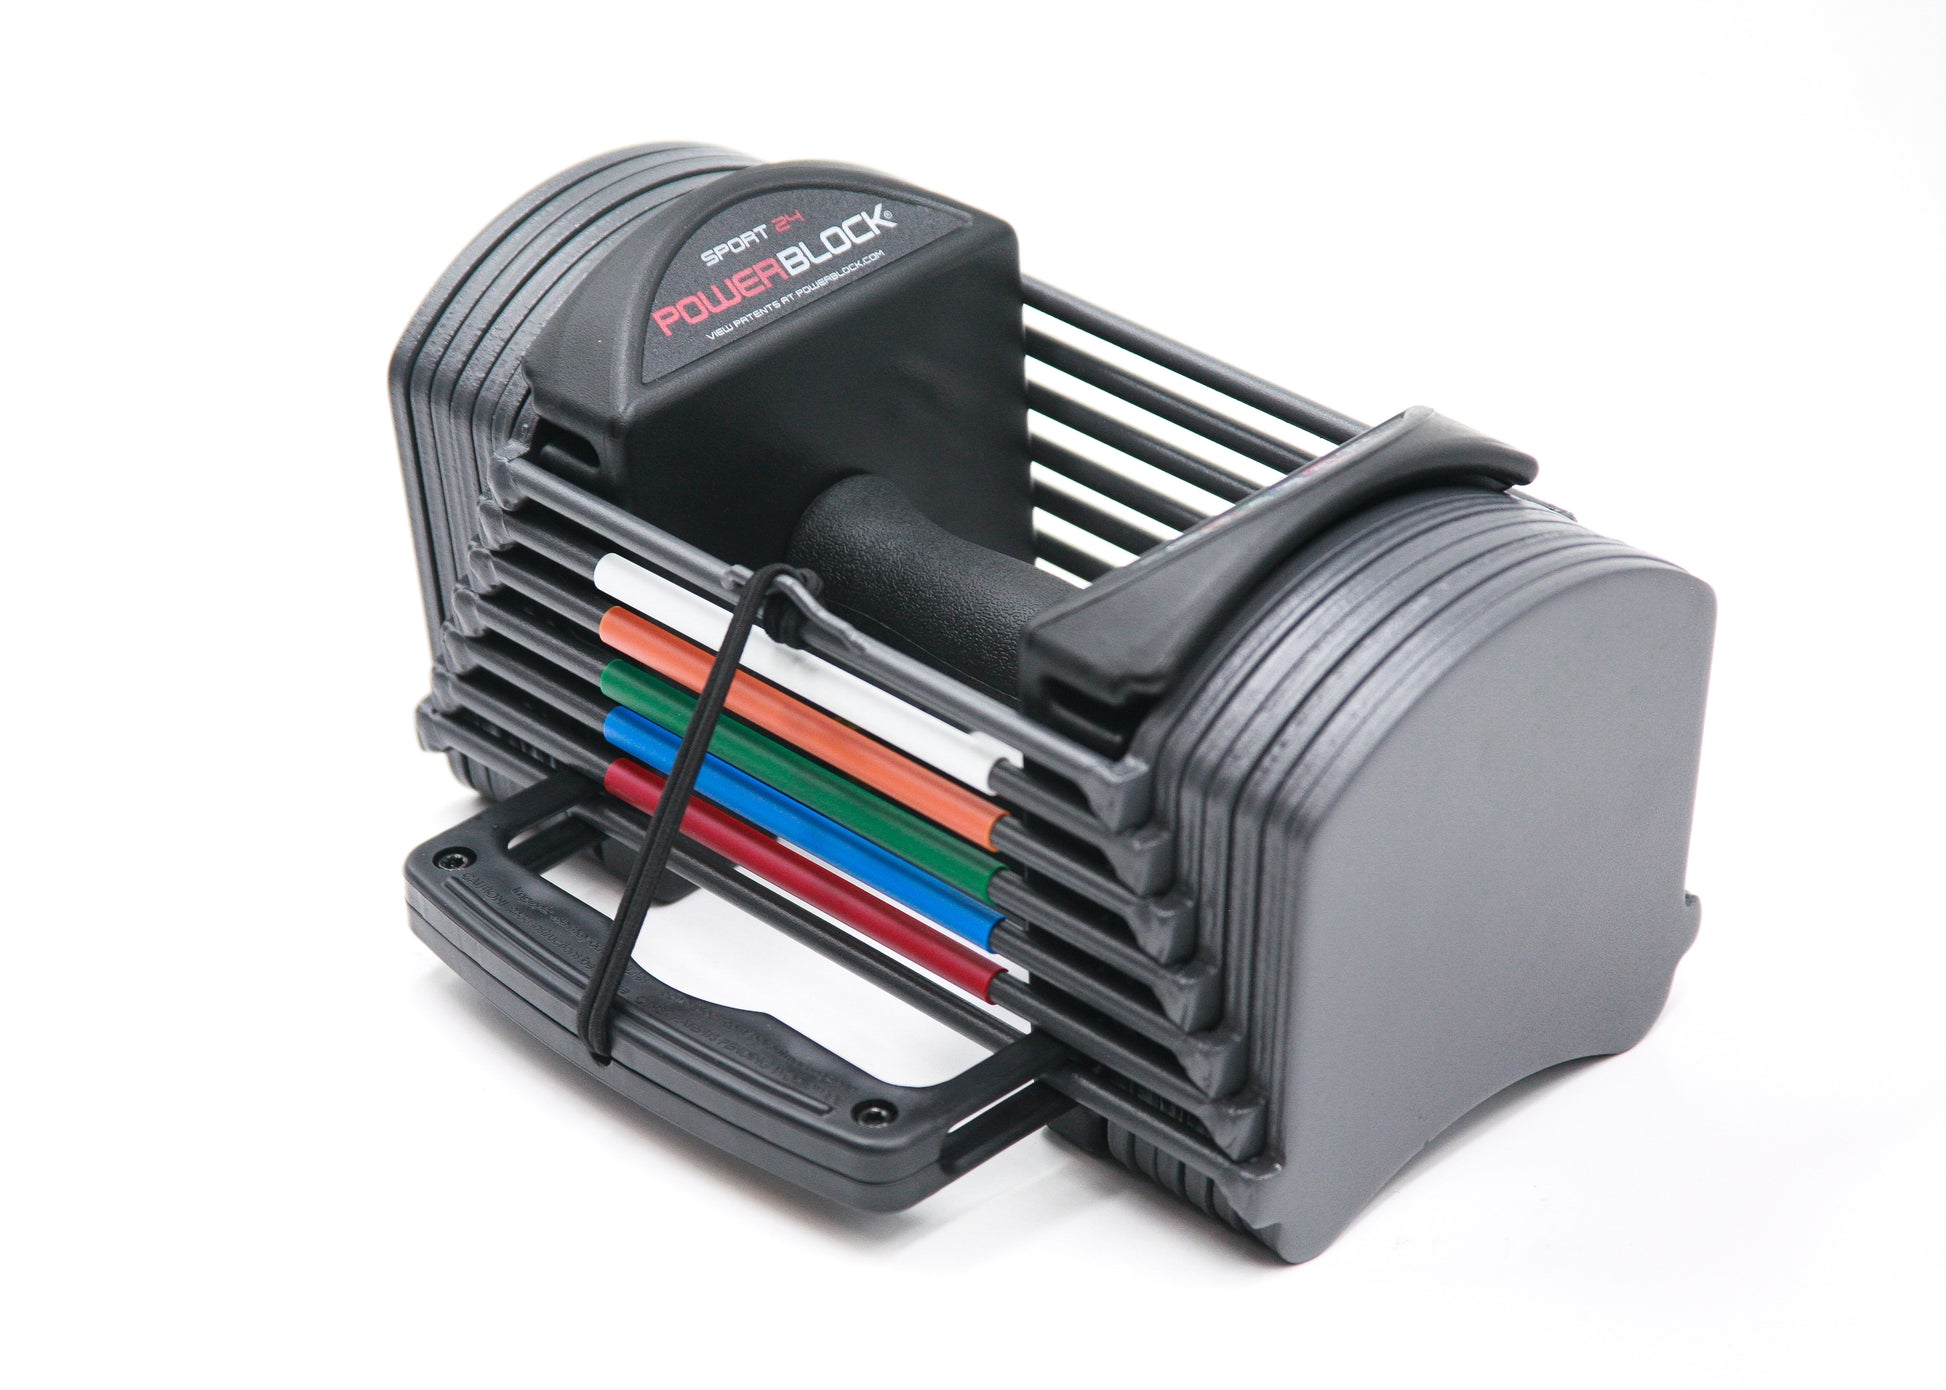 One set of PowerBlock Sport 24 dumbbells that range from 3 to 24 pounds in weight.